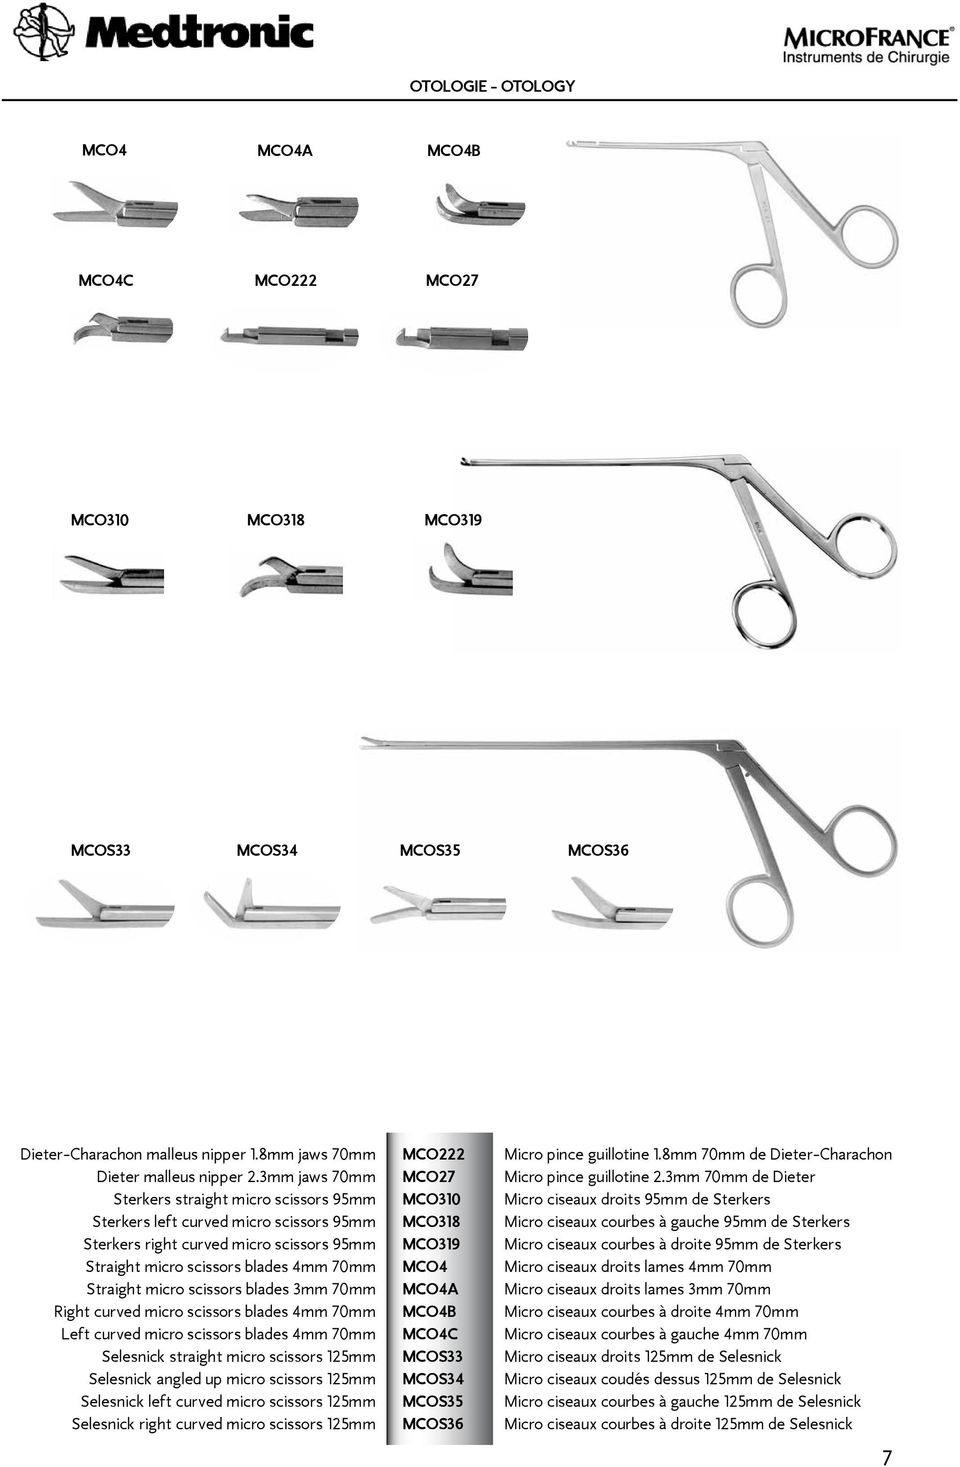 blades 3mm 70mm Right curved micro scissors blades 4mm 70mm Left curved micro scissors blades 4mm 70mm Selesnick straight micro scissors 125mm Selesnick angled up micro scissors 125mm Selesnick left